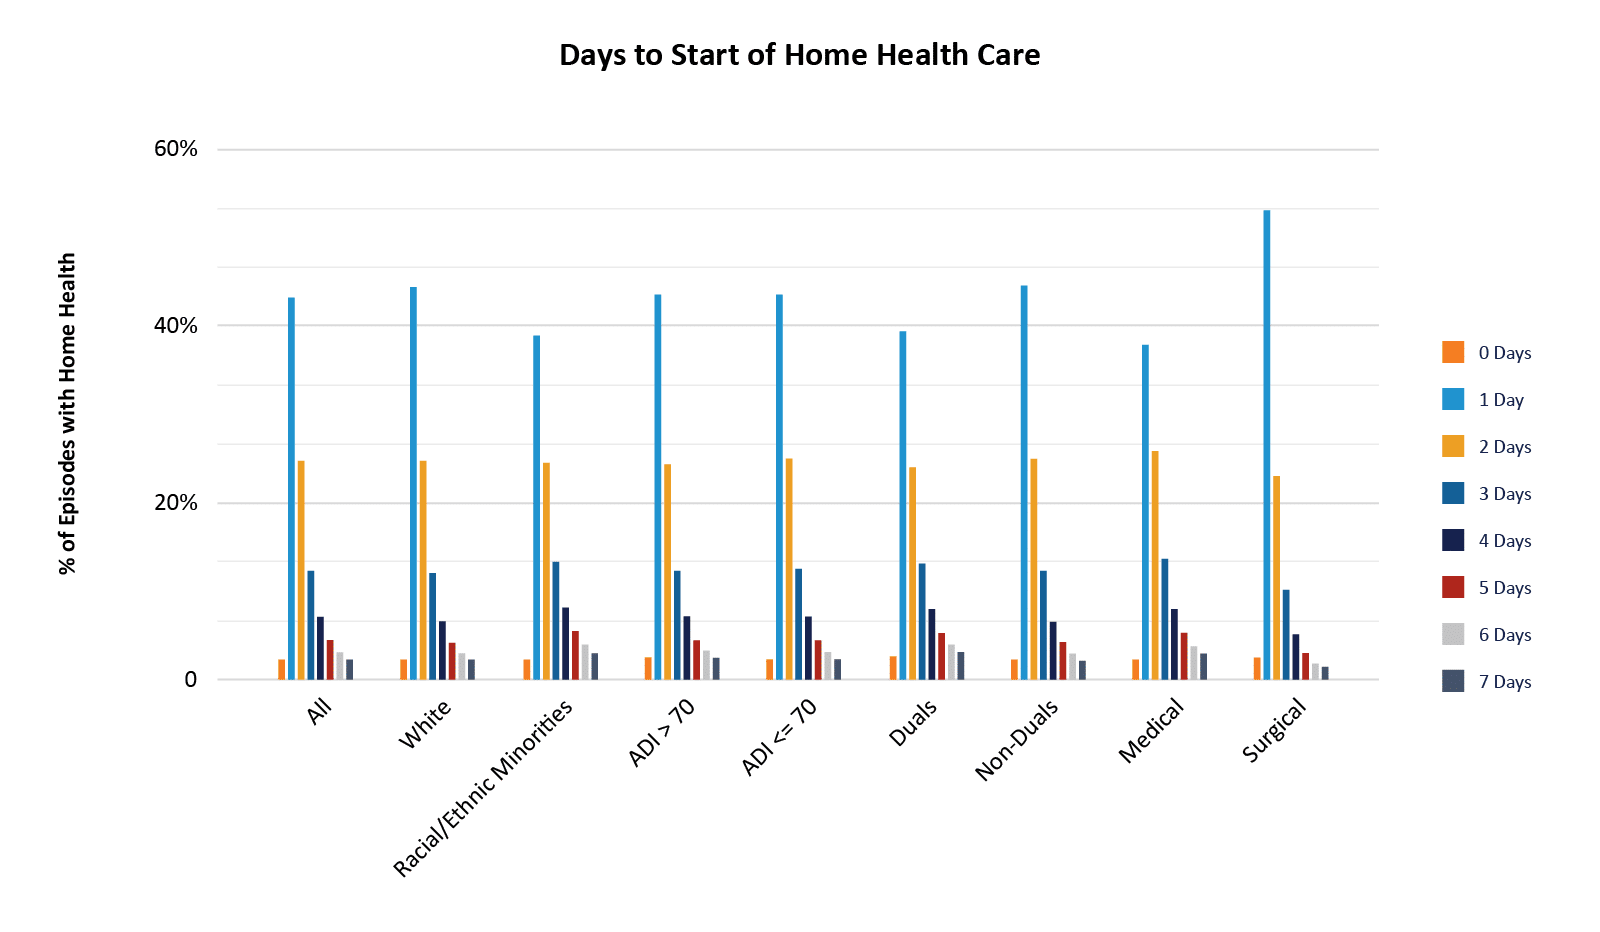 Days to Start of Home Health Care